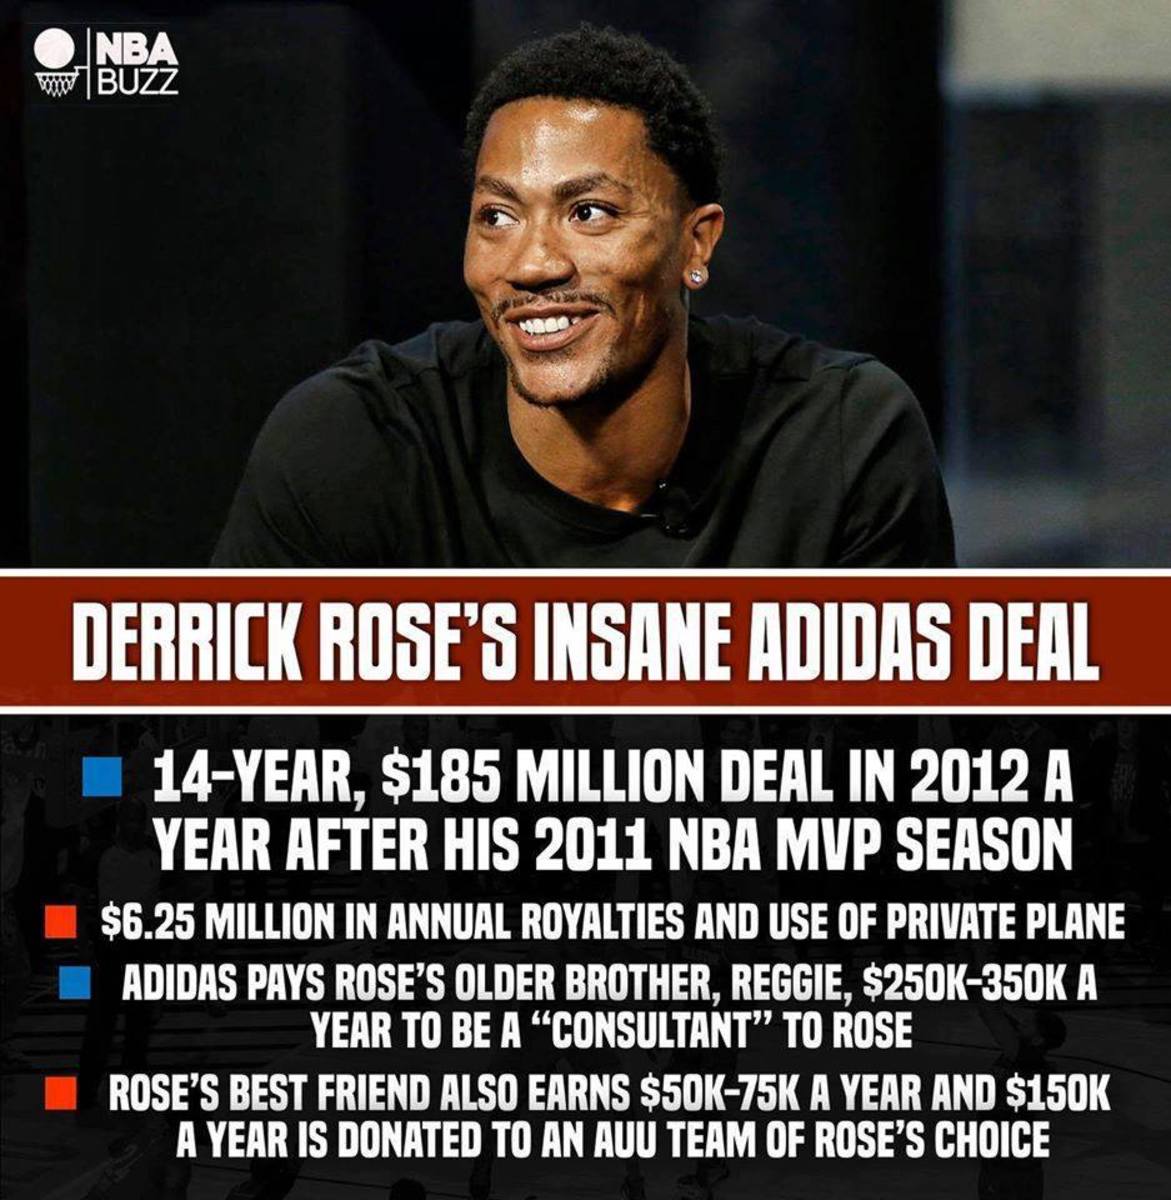 Marco Polo Criticar Limitado Derrick Rose Is Still Making Millions From His Adidas Deal In 2012 -  Fadeaway World